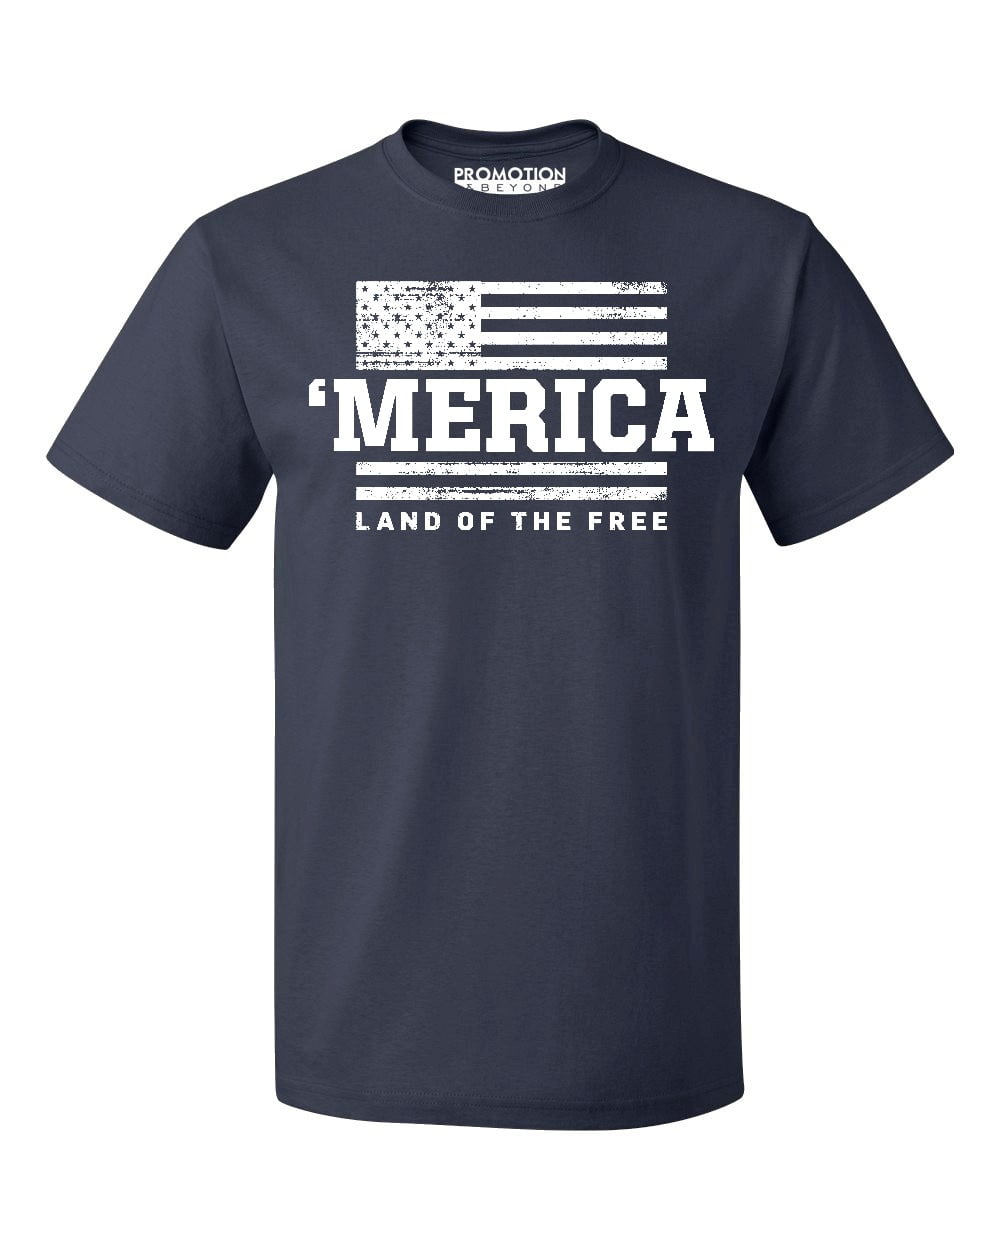 Men's 4th of July Shirt Fourth of July Gifts Freedom Shirt 4th of July T Shirt Merica Clothing